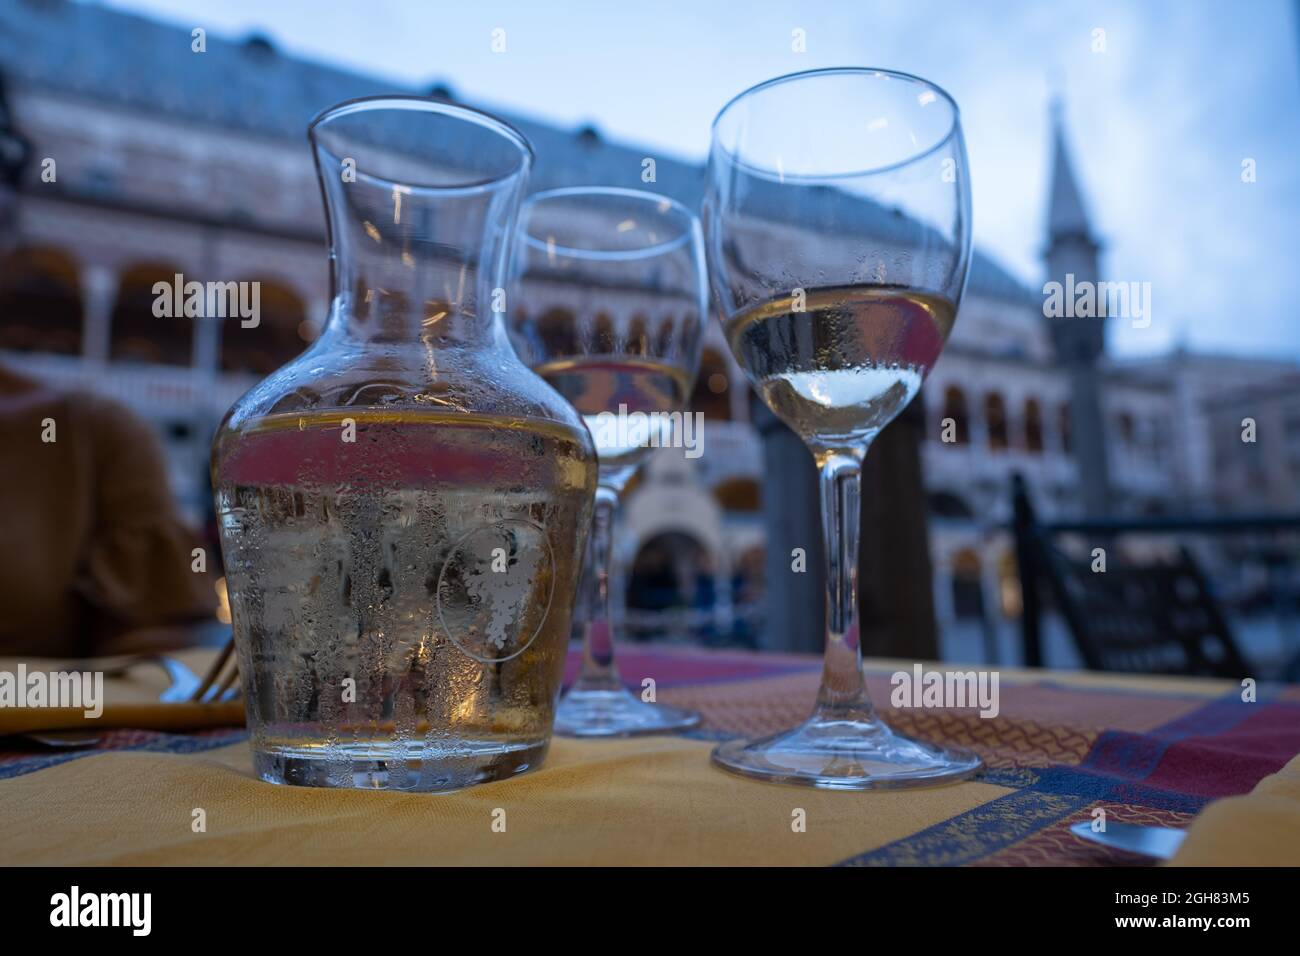 Hot summer in the city, moment of respite, glasses and carafe of white wine Stock Photo